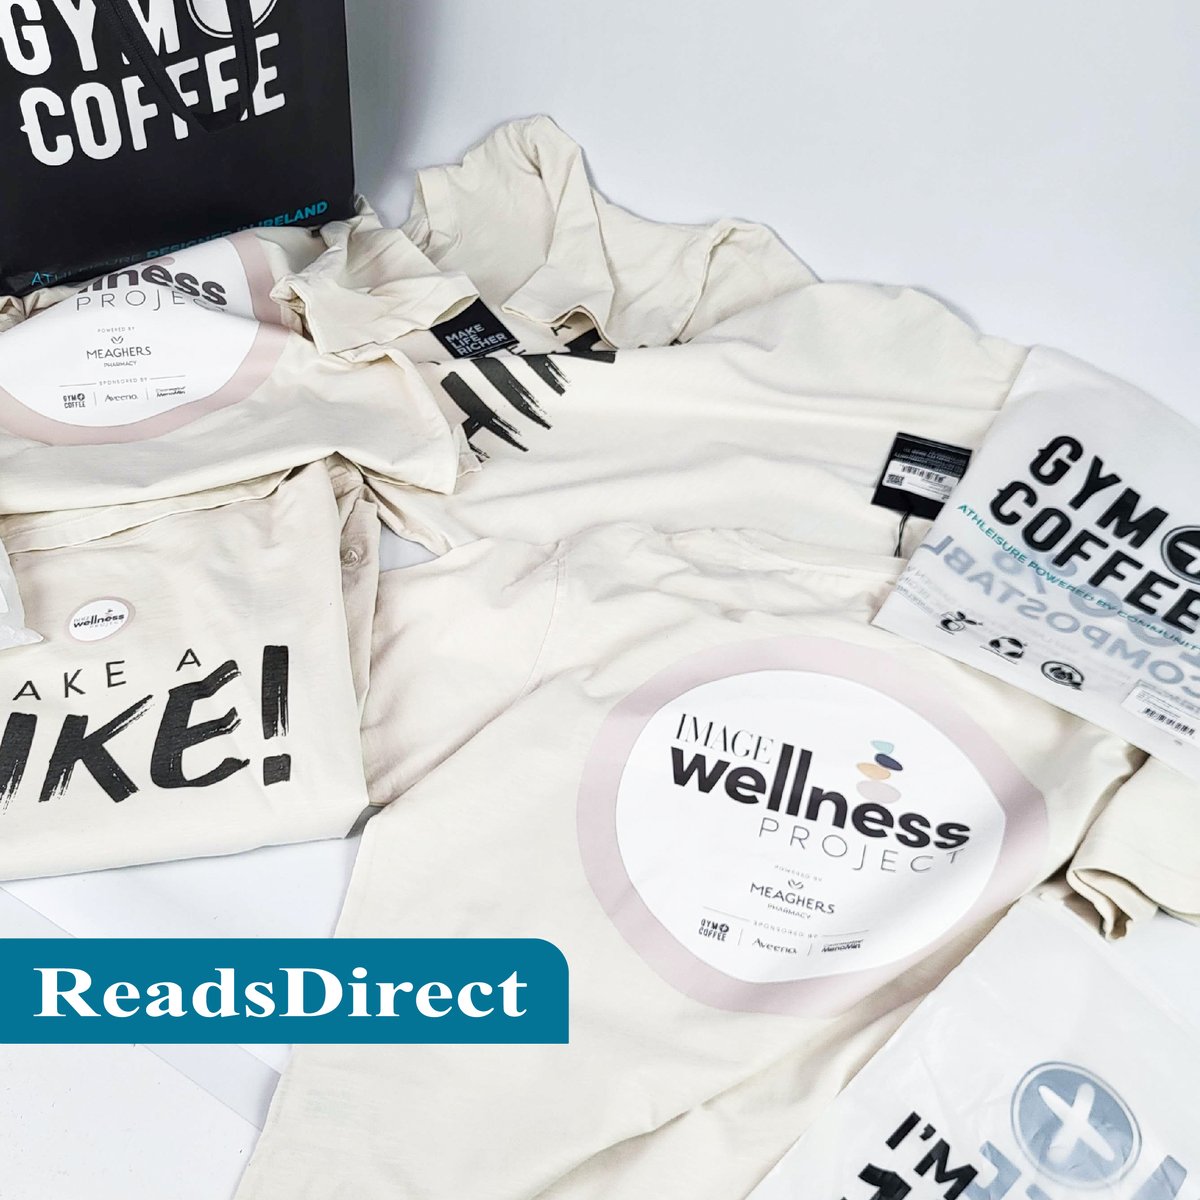 It was such a pleasure working with the @image_magazine team, Thank you so much to Saoirse for choosing ReadsDirect for this project!

#personalisedtshirts #businessprinting #customprinting #printingservices #digitalprinting #largeformatprinting #readsdirect #ireland